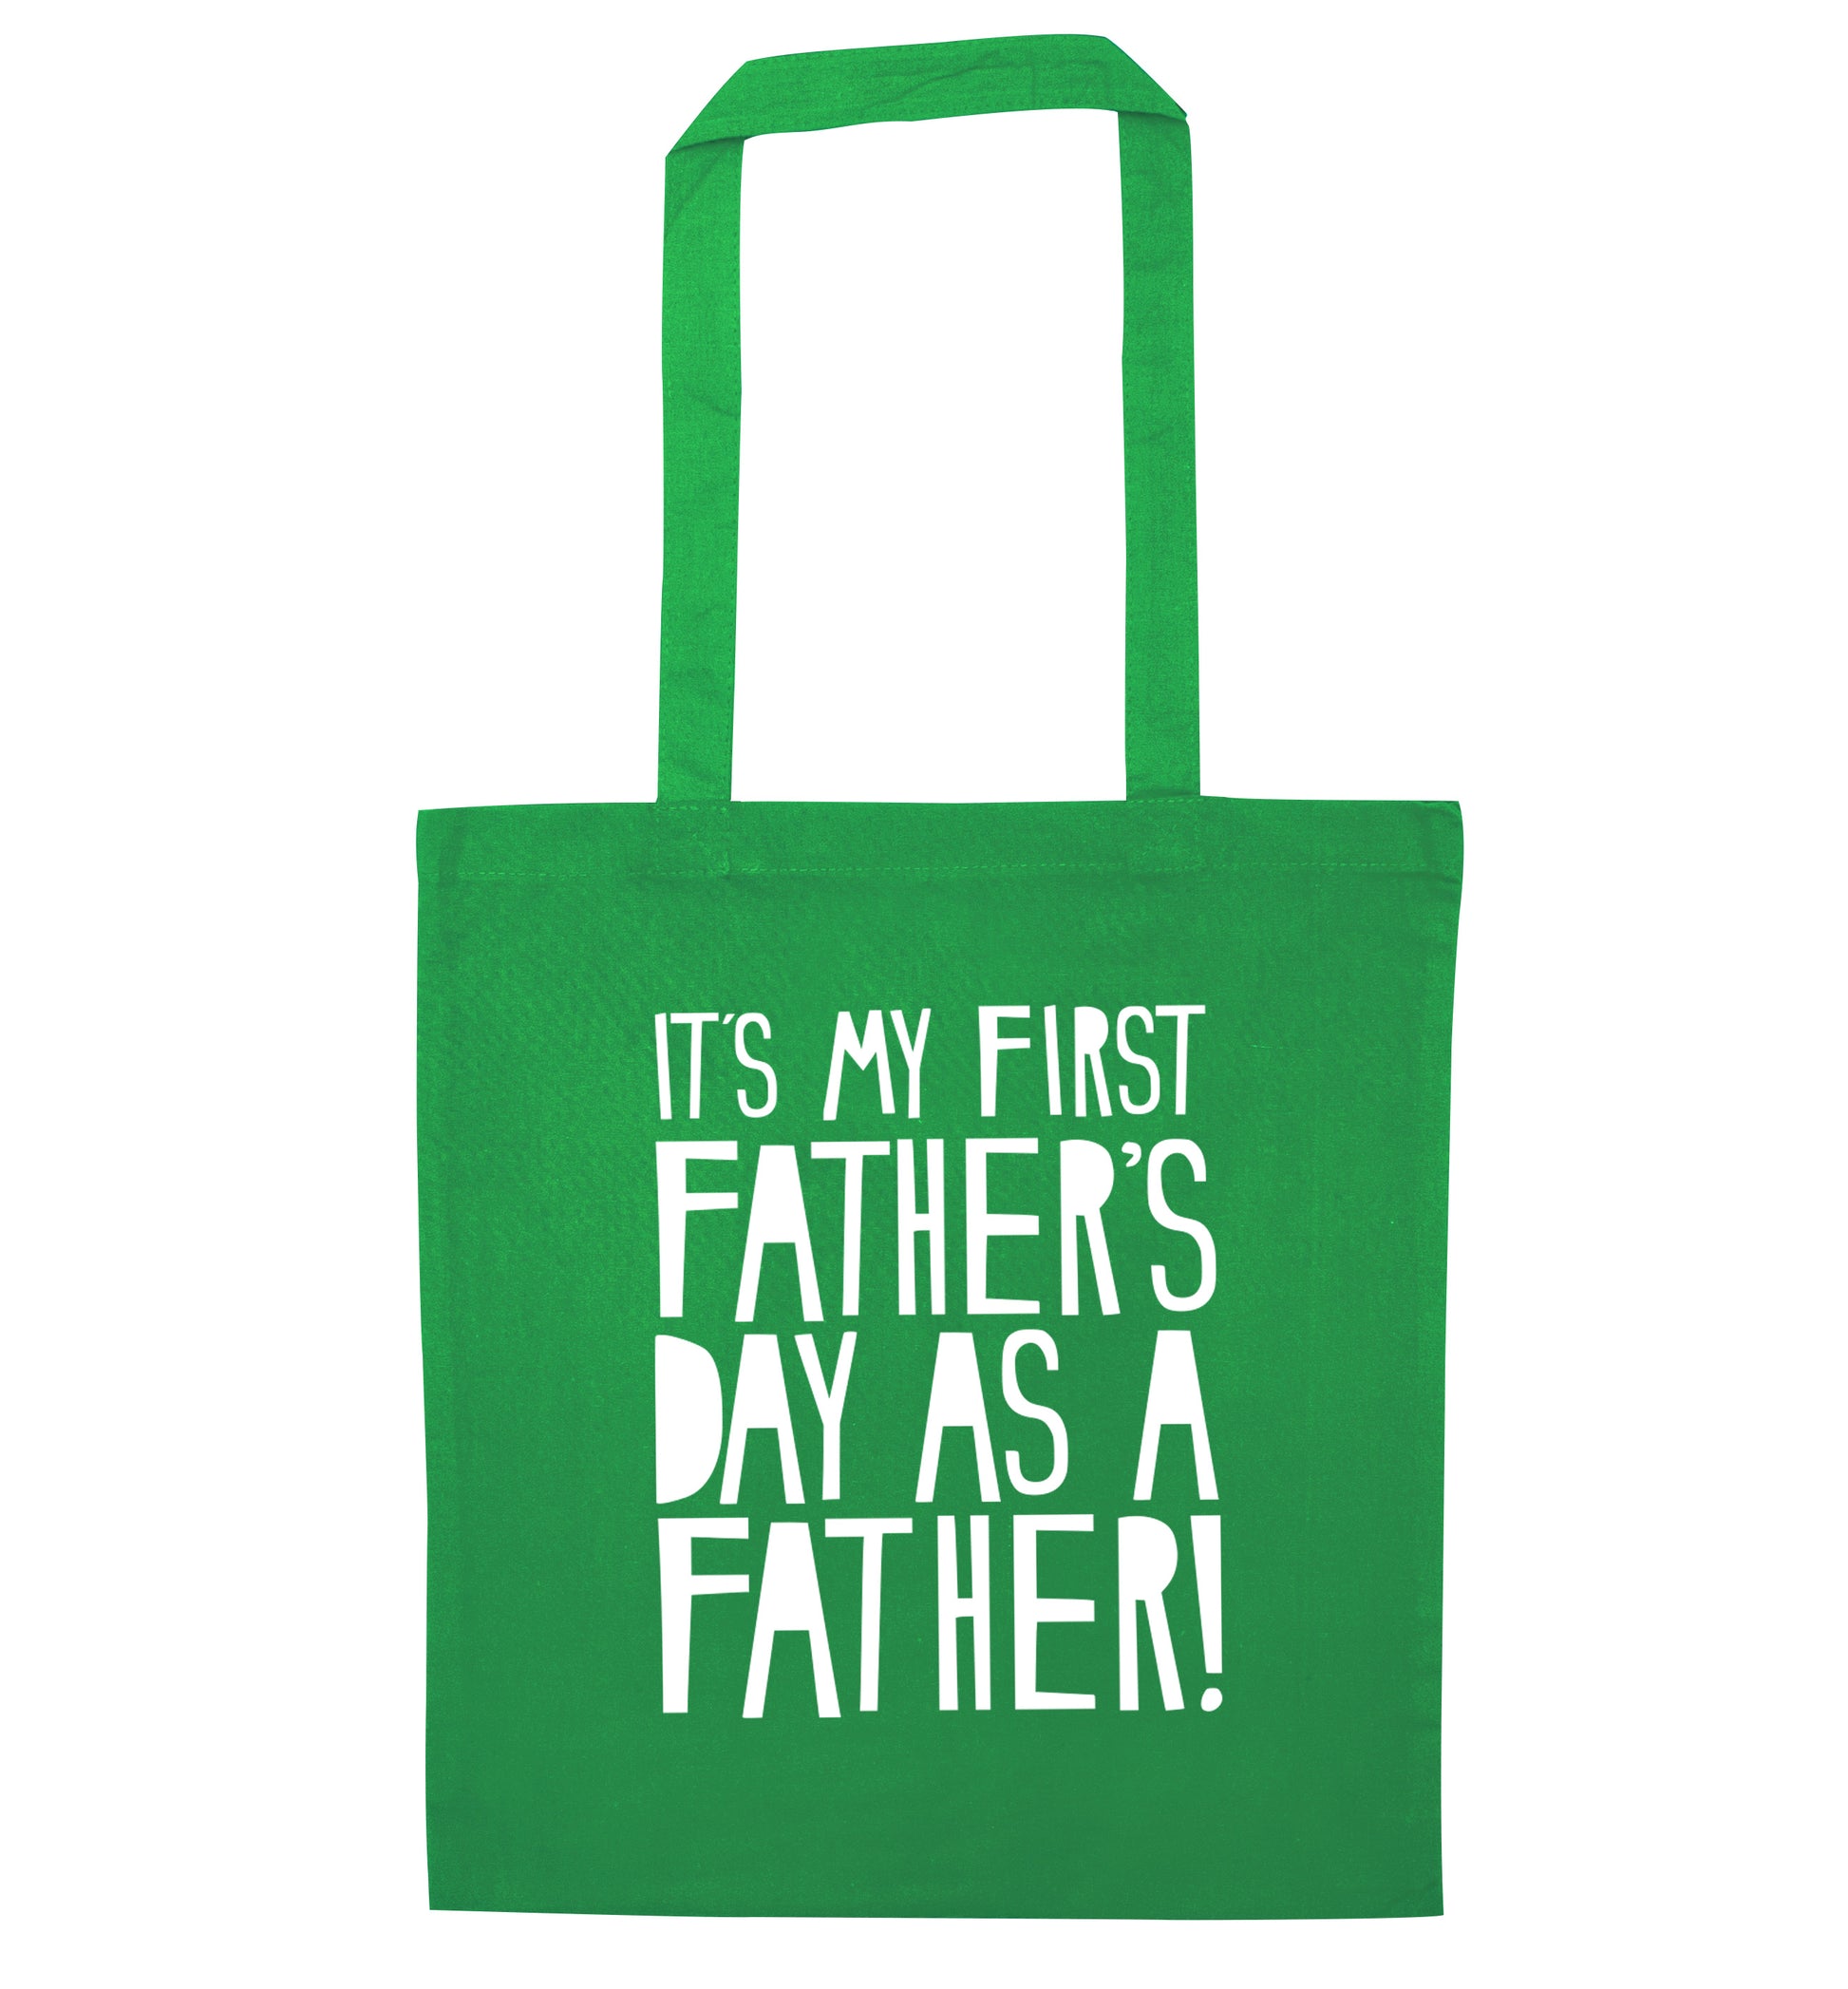 It's my first Father's Day as a father! green tote bag